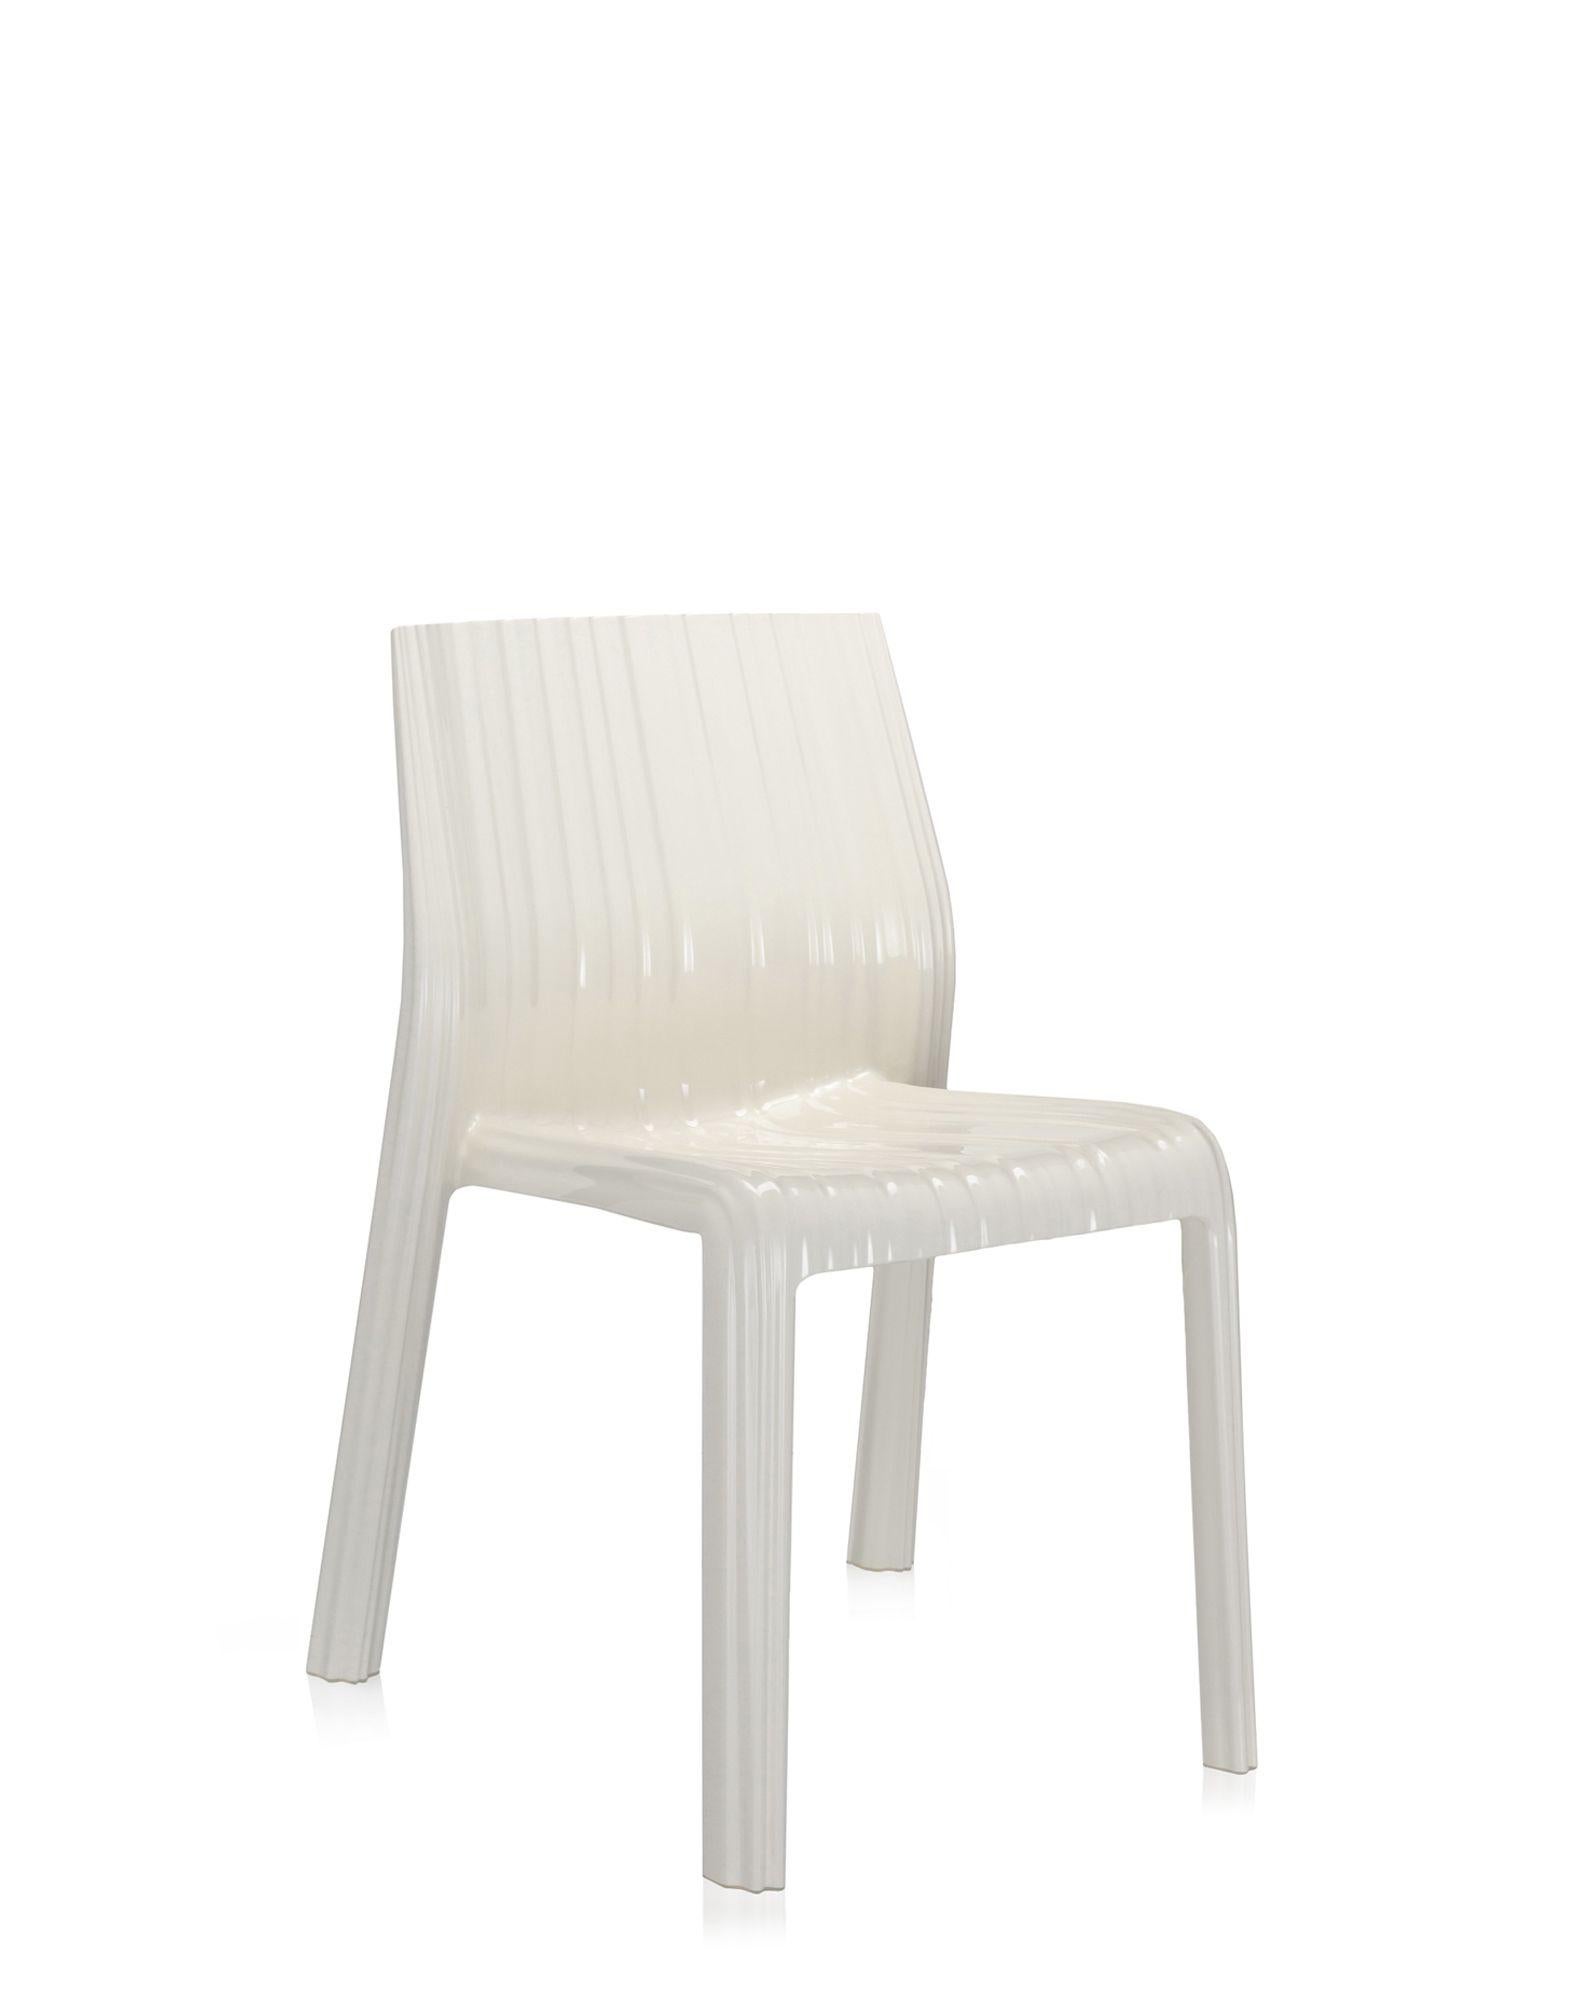 The wavy effect covering the entire structure gives this chair a light and soft look, like pleated fabric, for a sensual, fun and feminine optical effect.

Available in crystal and glossy white.